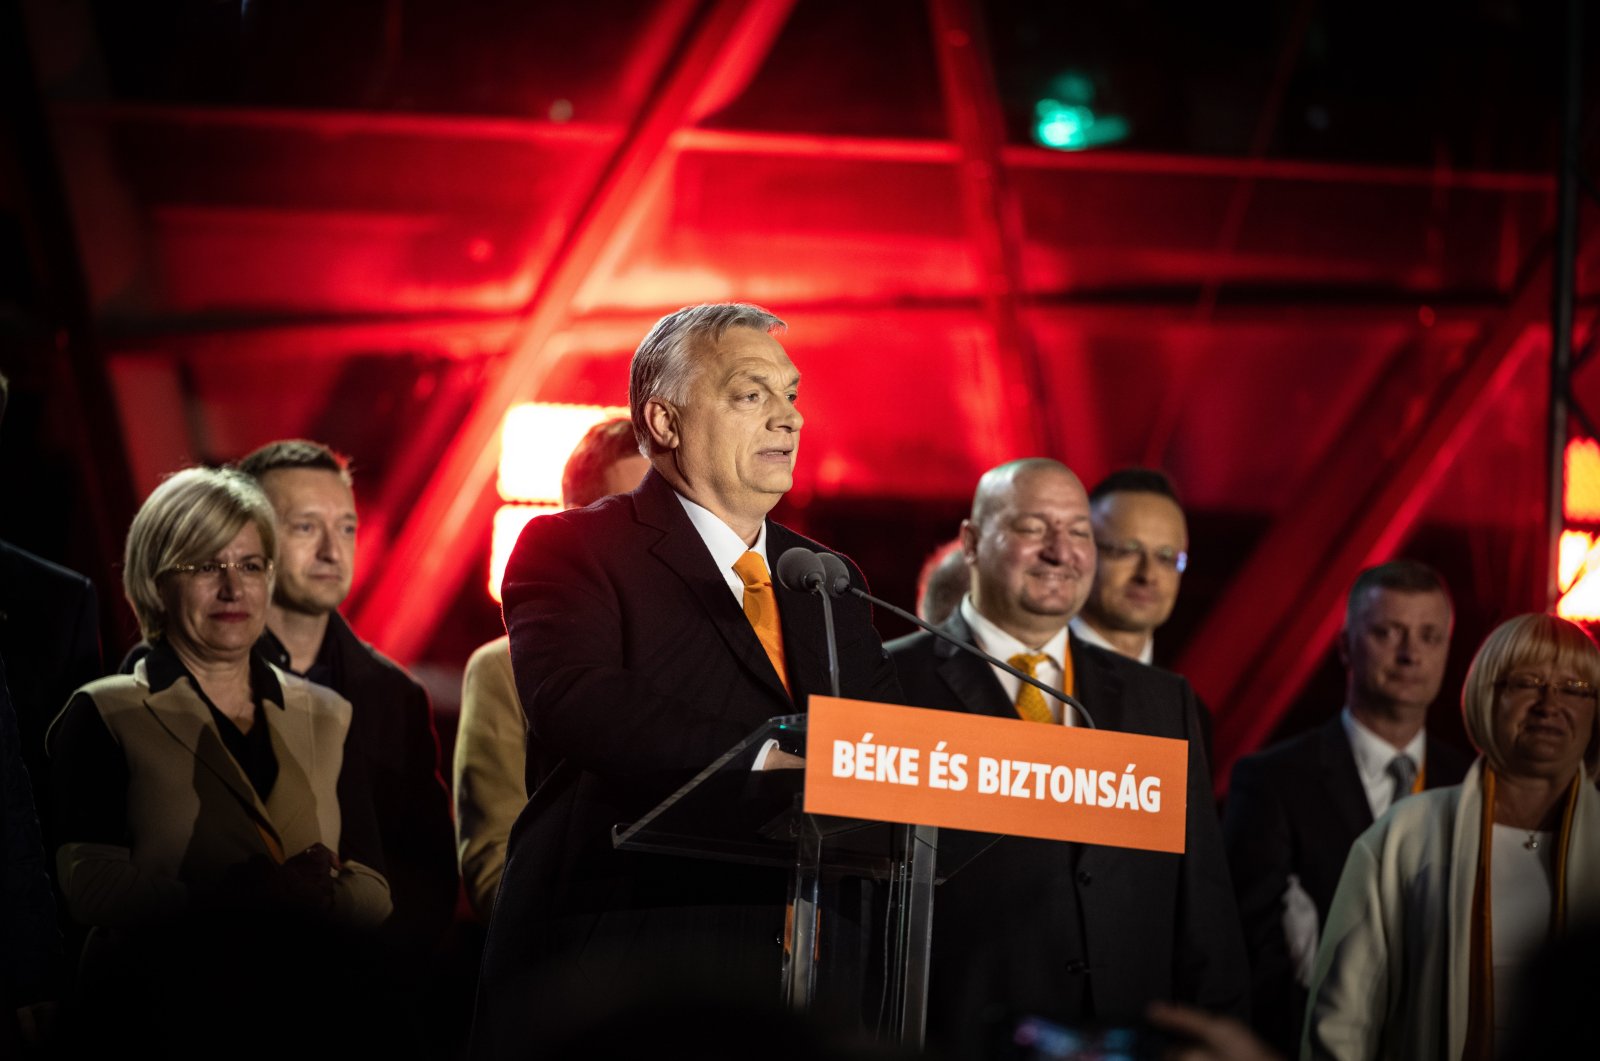 Hungarian Prime Minister Viktor Orban (C) delivers a speech during the governing Fidesz-KDNP party&#039;s event after the general election and national referendum on the child protection law in Budapest, Hungary, April 3, 2022. (Hungarian Prime Minister&#039;s Office / Handout via EPA)